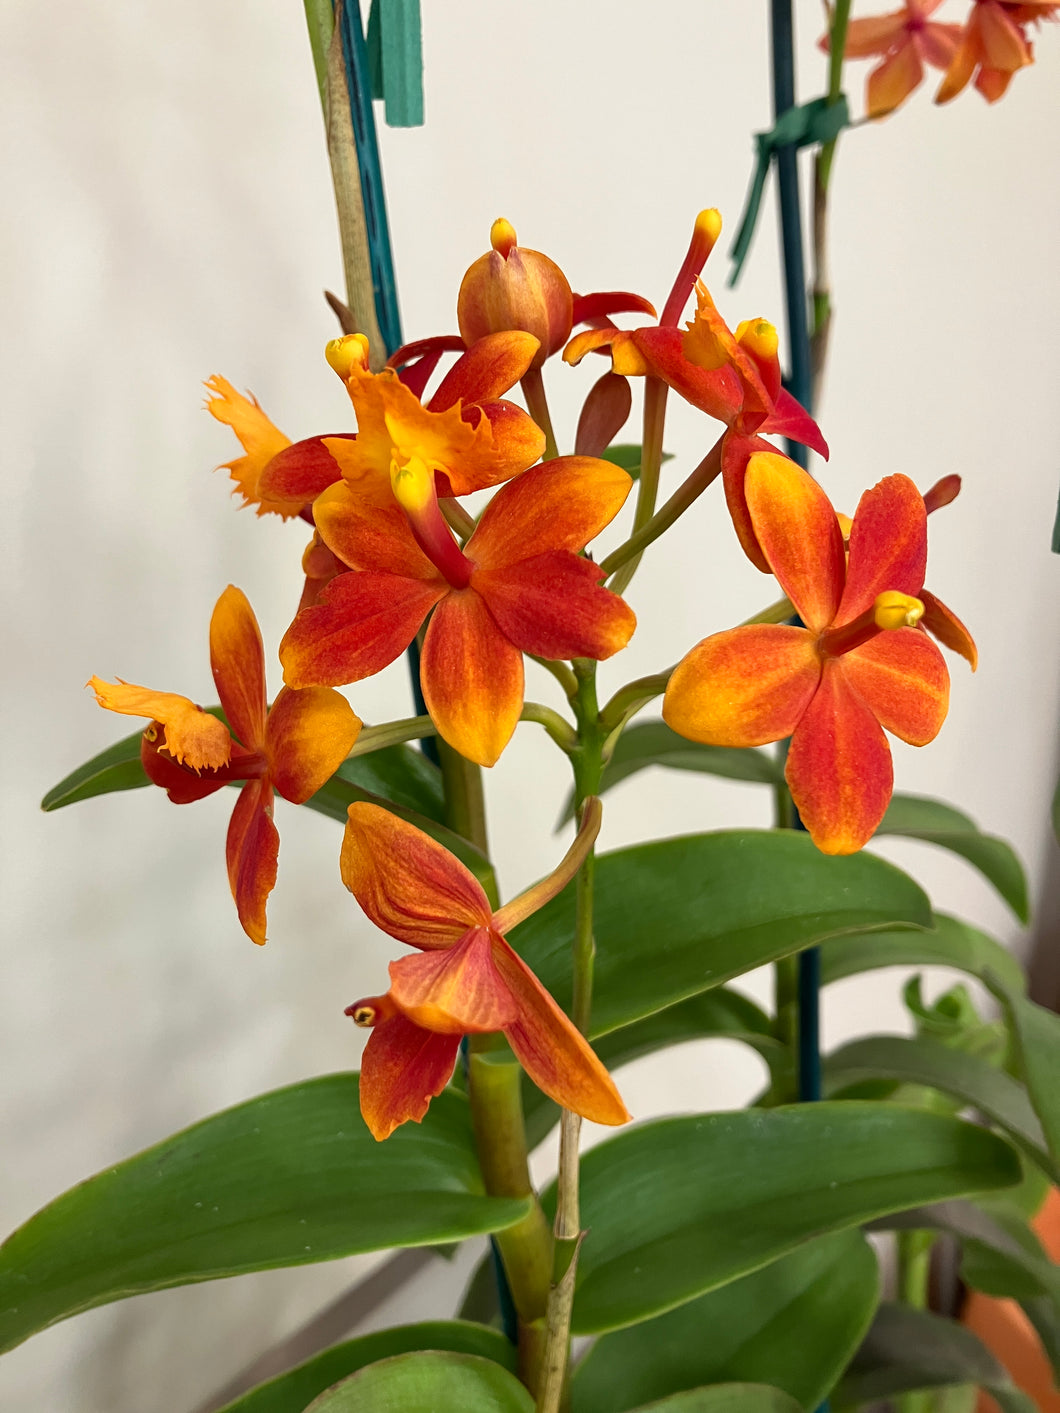 Epidendrum (Pacific classic ‘PomPom’ x Pacific Playa ‘Party Boy’